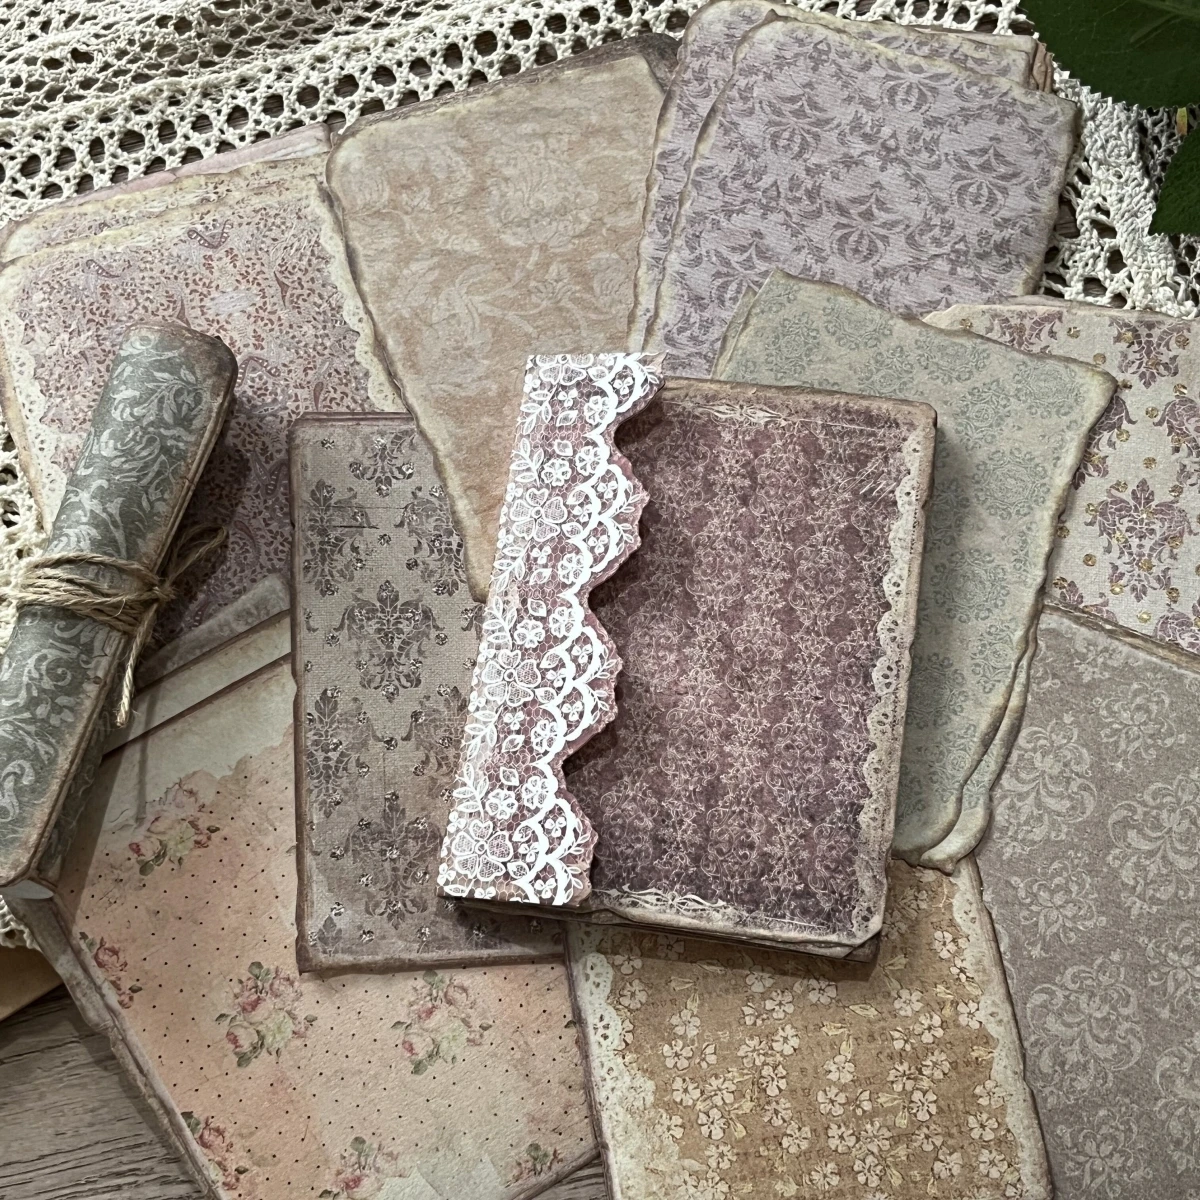 

Vintage Irregular Edges Material Paper White Lace Pattern Paper Old Memo Pad Deco Scrapbooking Diary Collage Junk Journaling